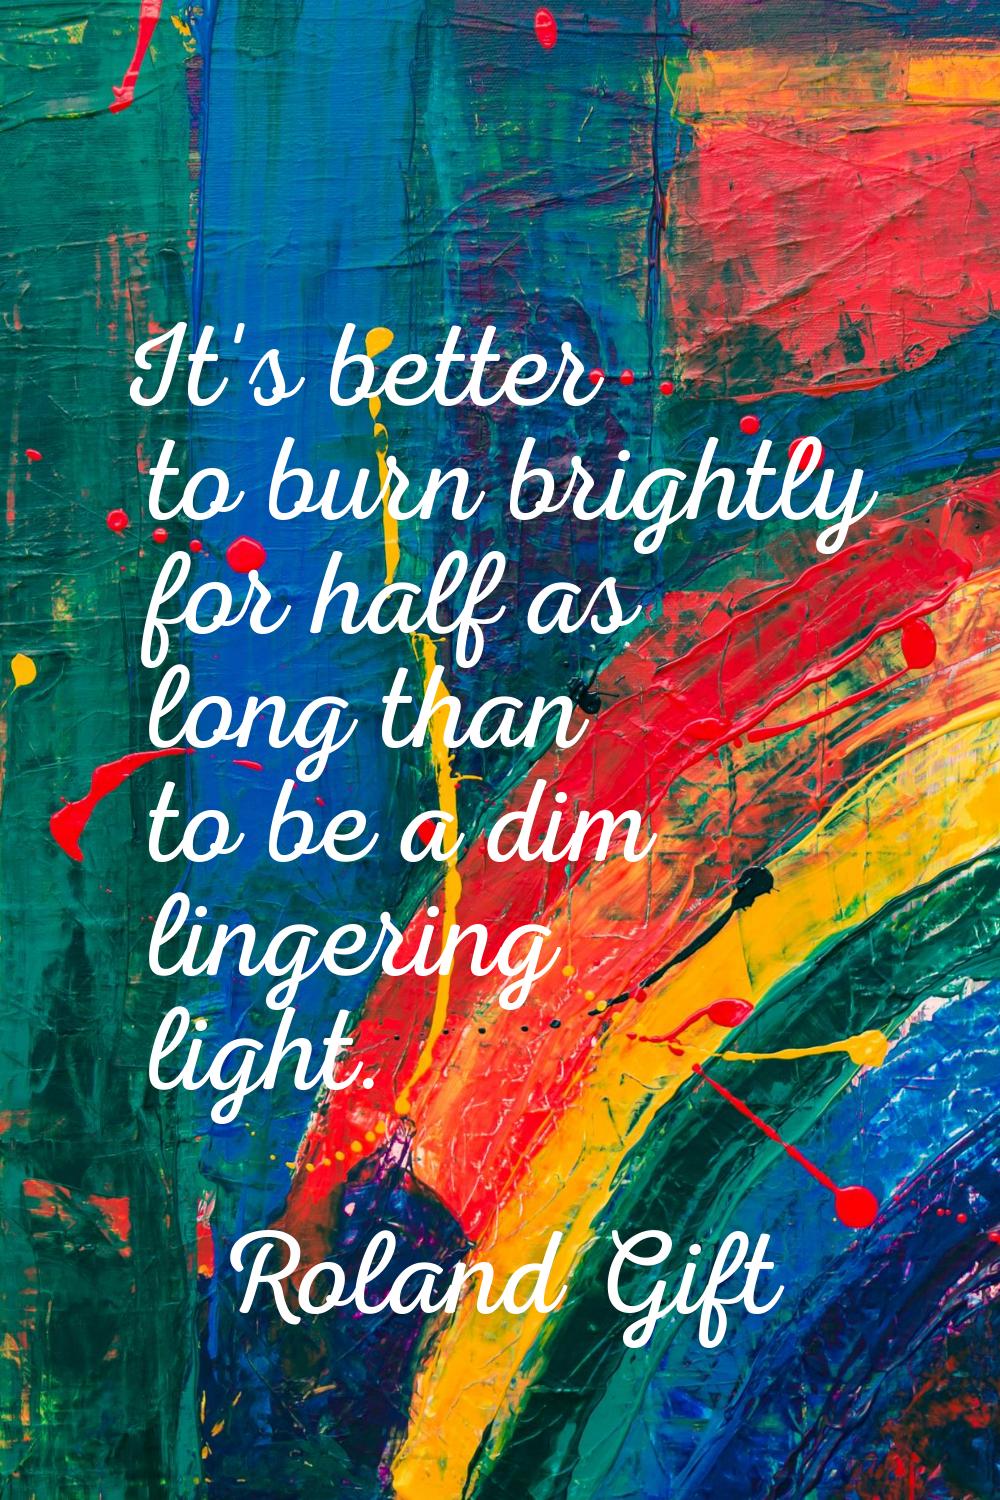 It's better to burn brightly for half as long than to be a dim lingering light.